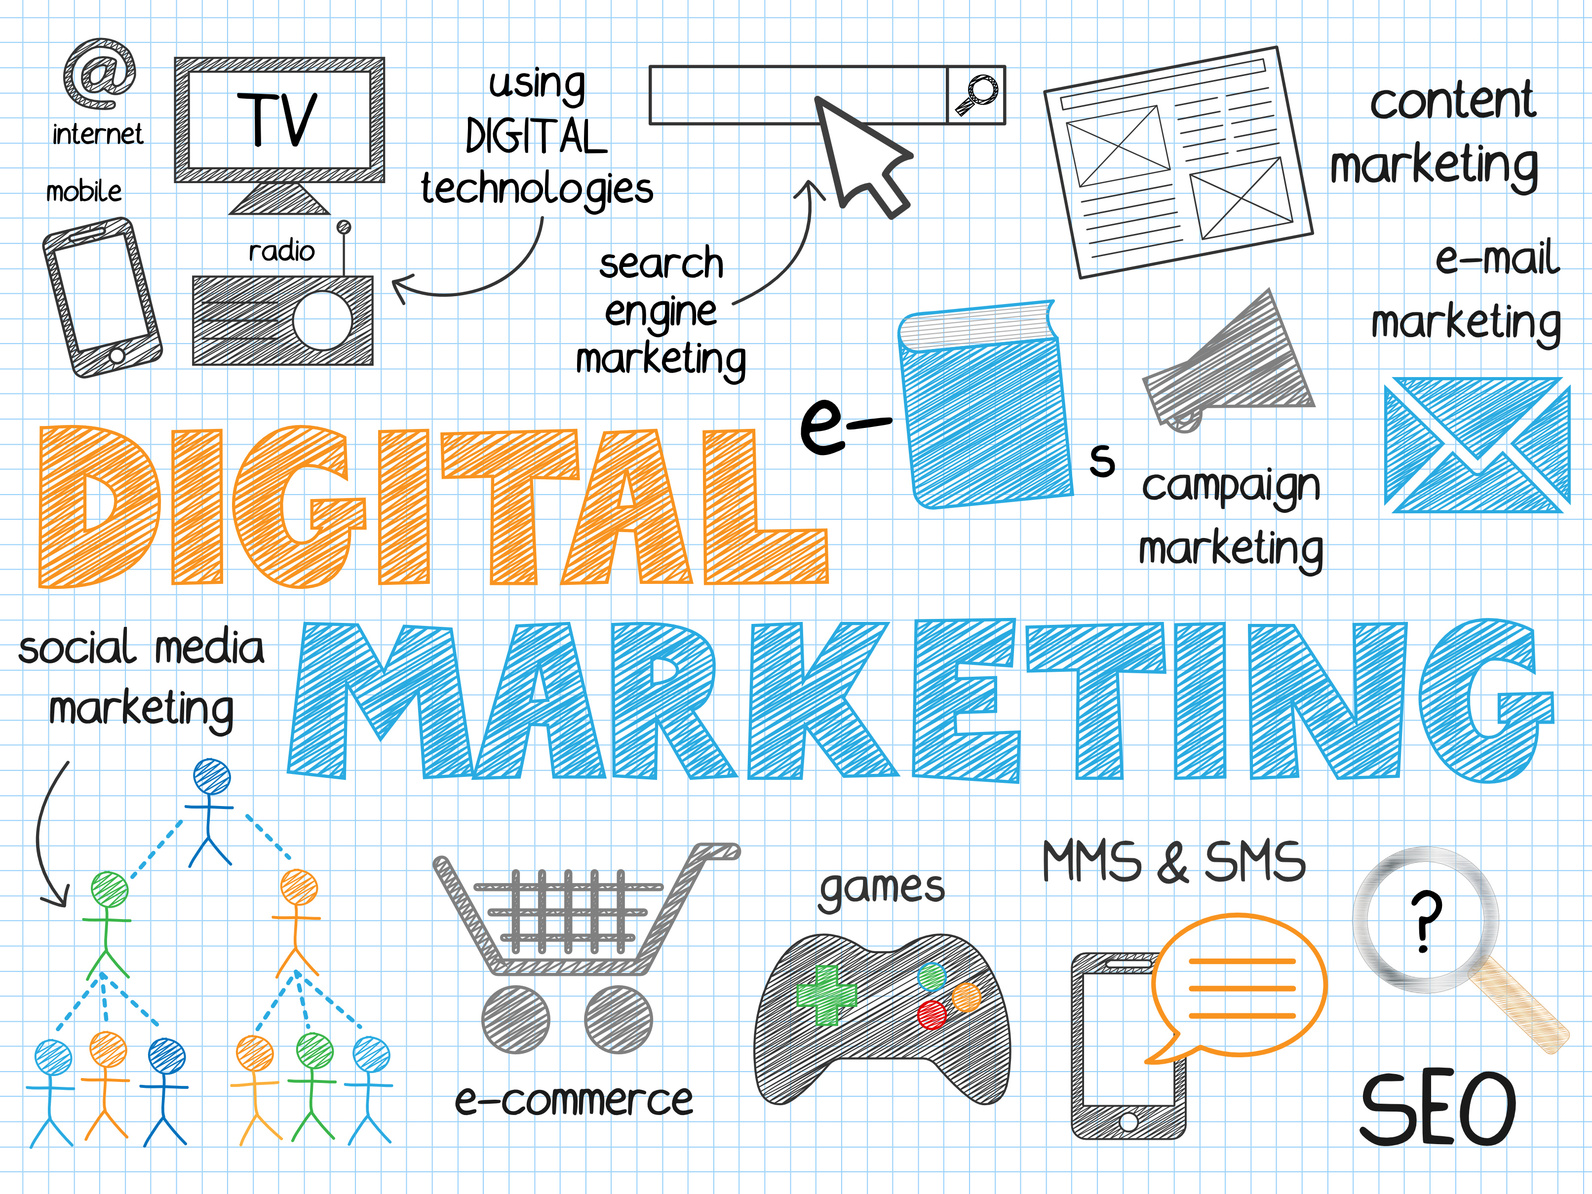 What Do These Digital Marketing Statistics Mean to Your Online Business?